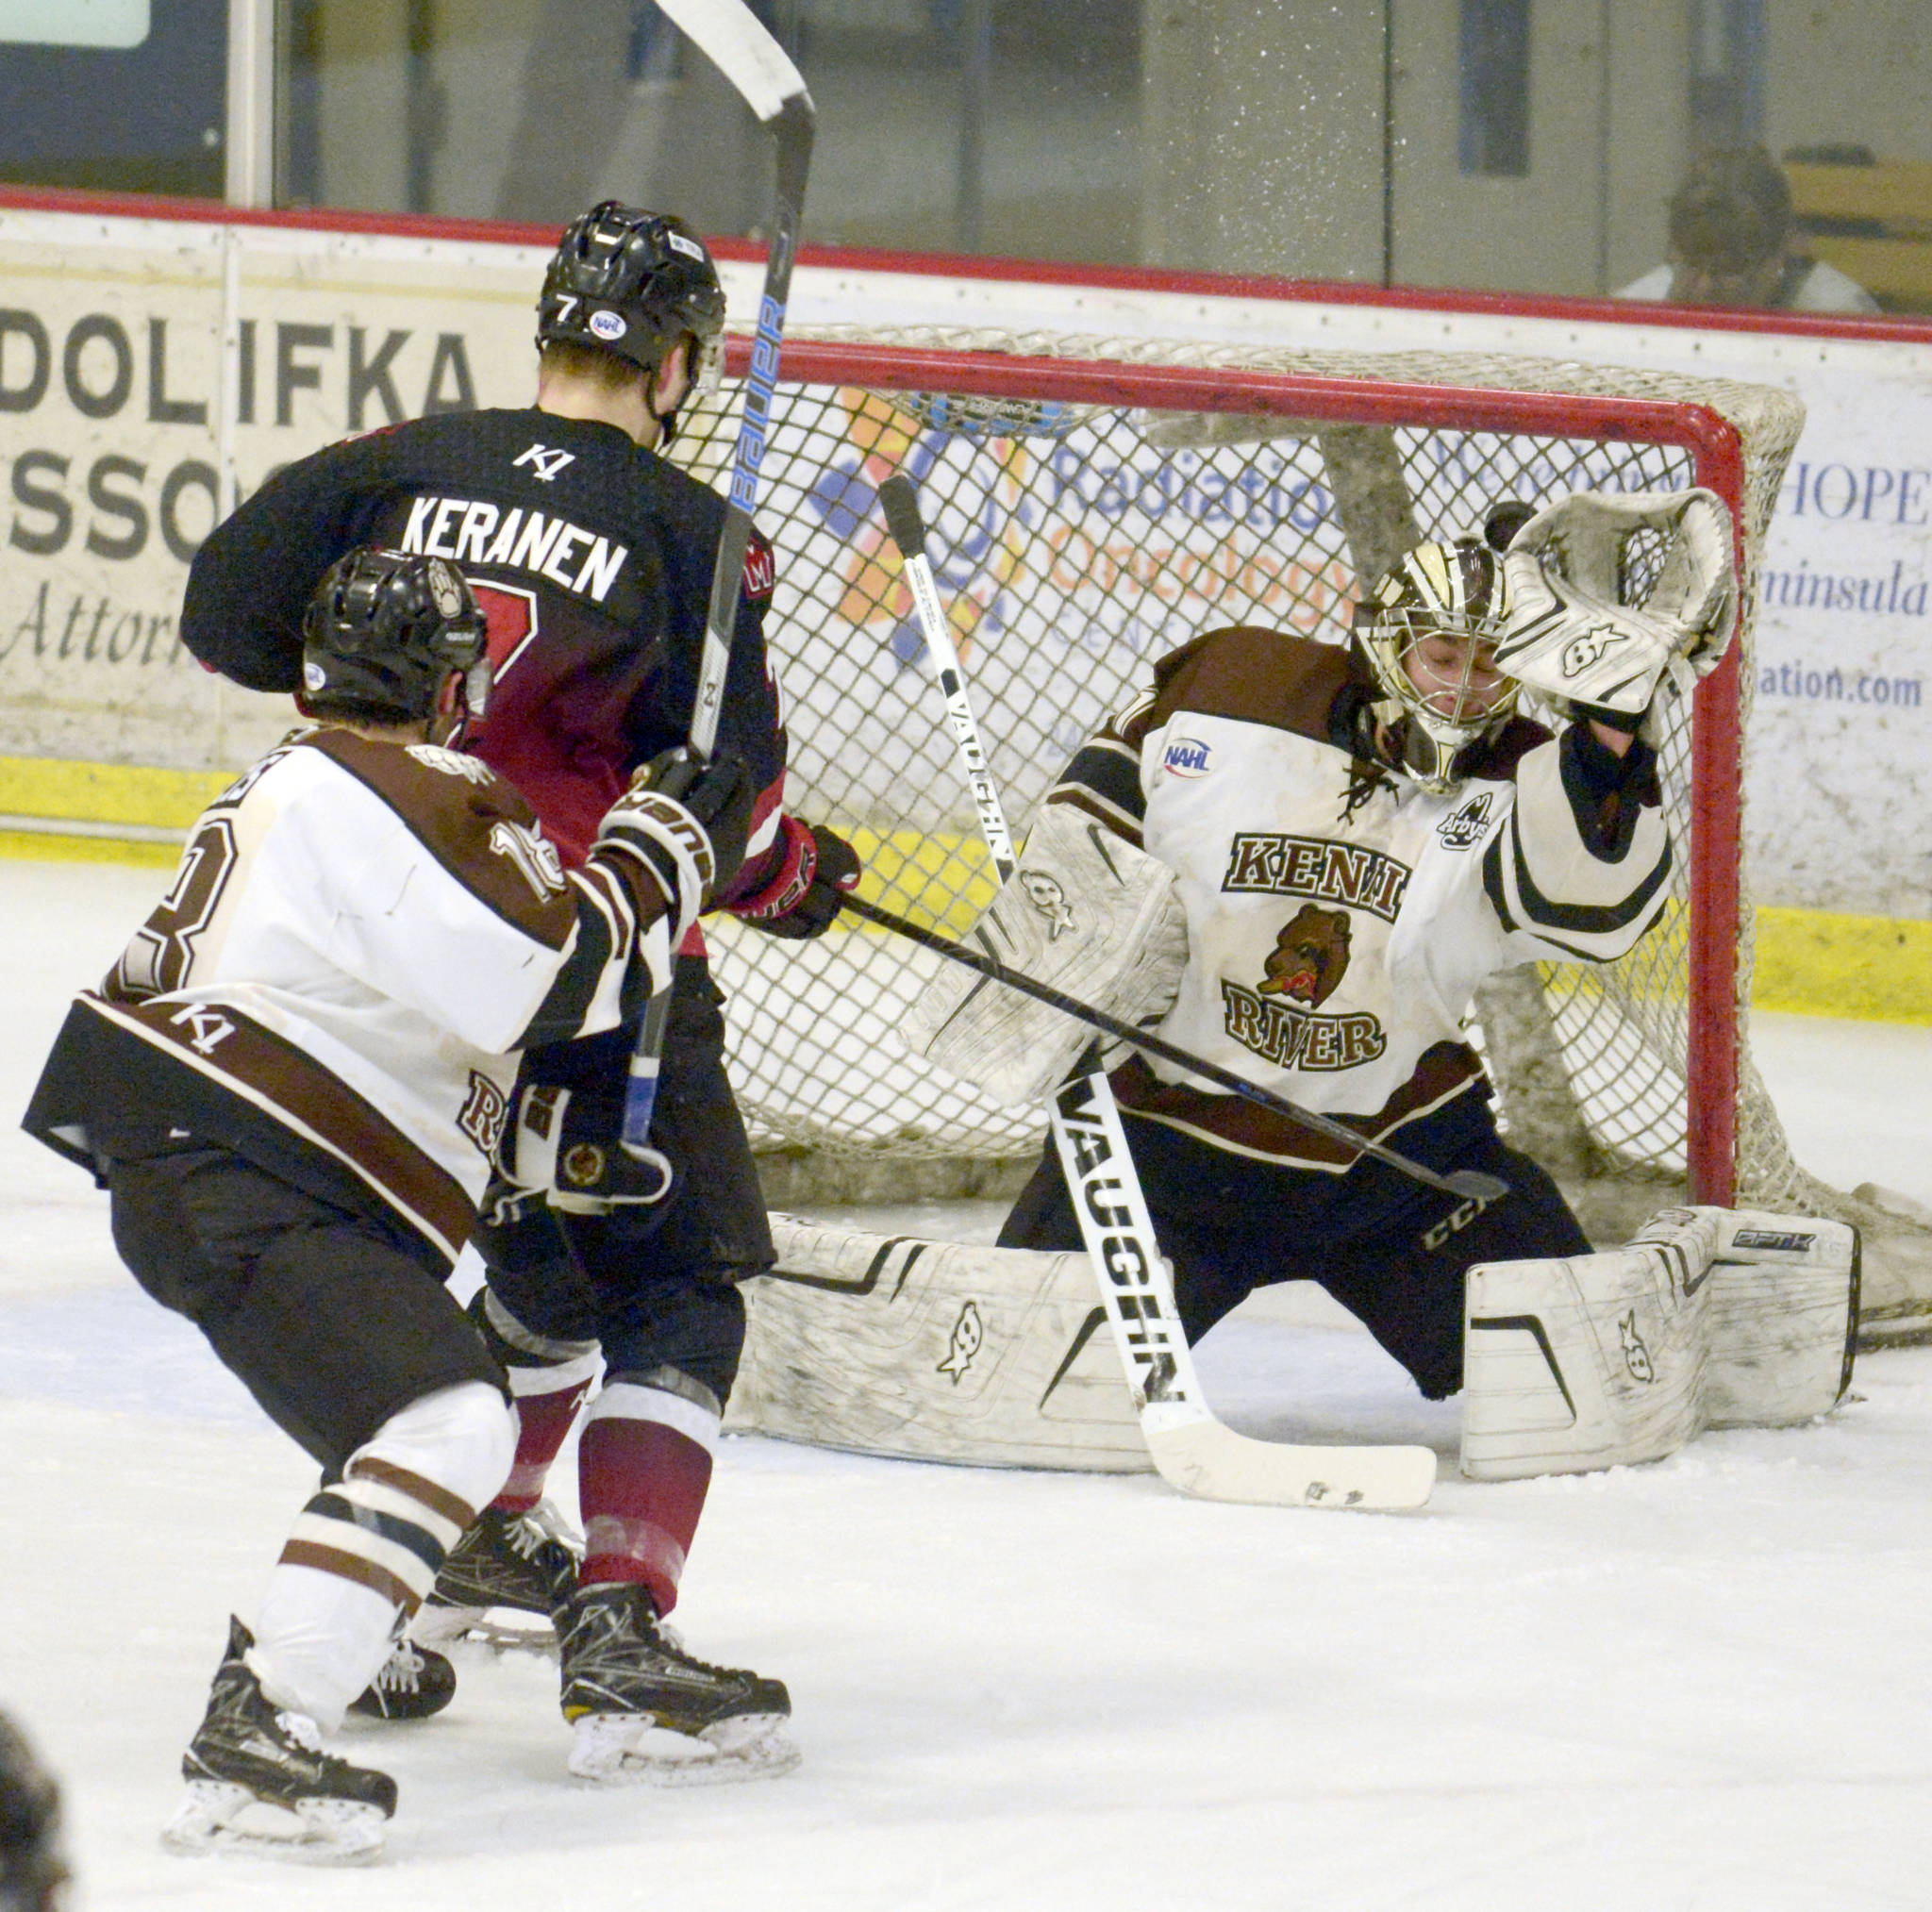 The puck squirts by the glove of Kenai River Brown Bears goaltender Gavin Enright, then goes over the goal, Thursday, March 14, night against the Minnesota Magicians at the Soldotna Regional Sports Complex. (Photo by Jeff Helminiak/Peninsula Clarion)